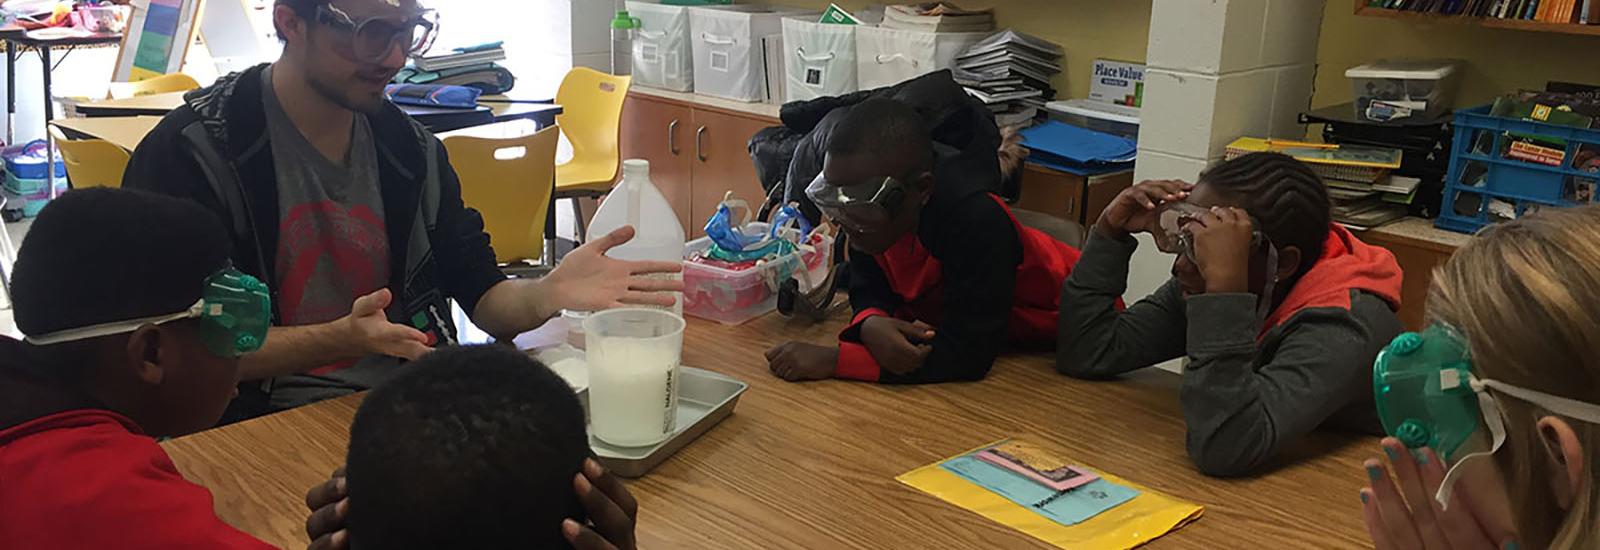 Photograph of WOW student teaching 5th graders about chemical reactions with vinegar and baking soda.